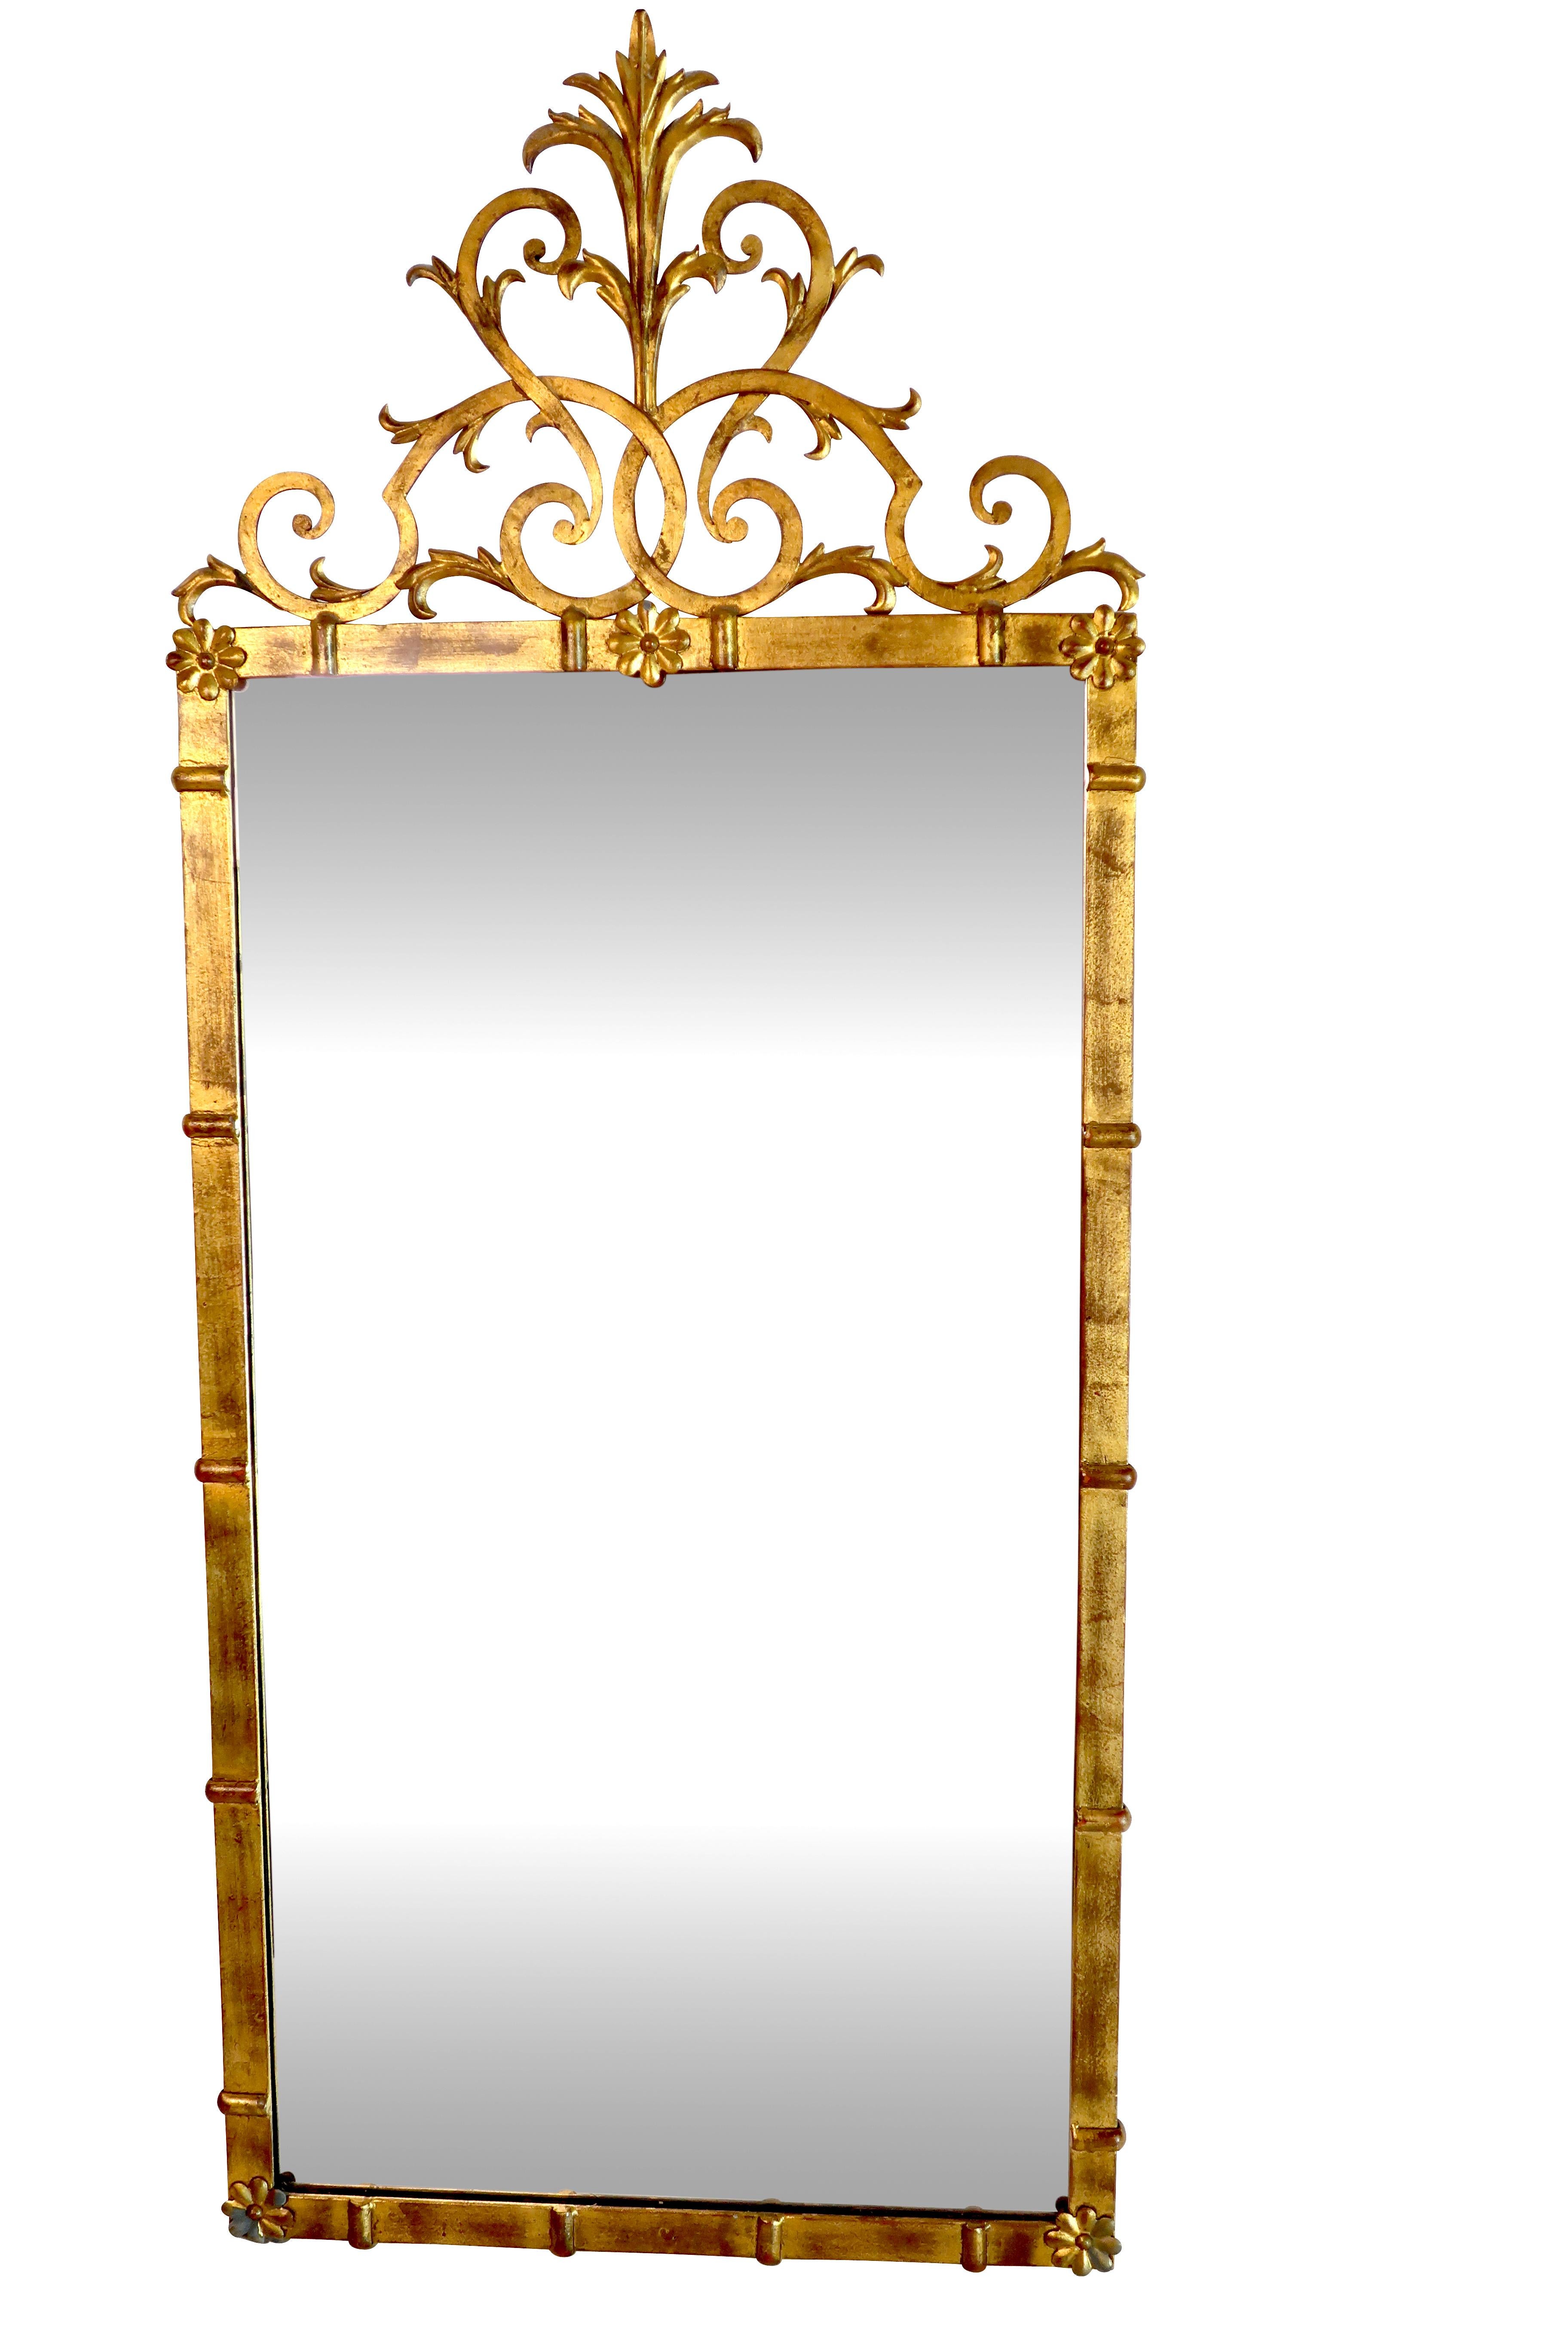 Classical Style Gold Metal Mirror with Rosette Decoration Scrolled Finial Top 3